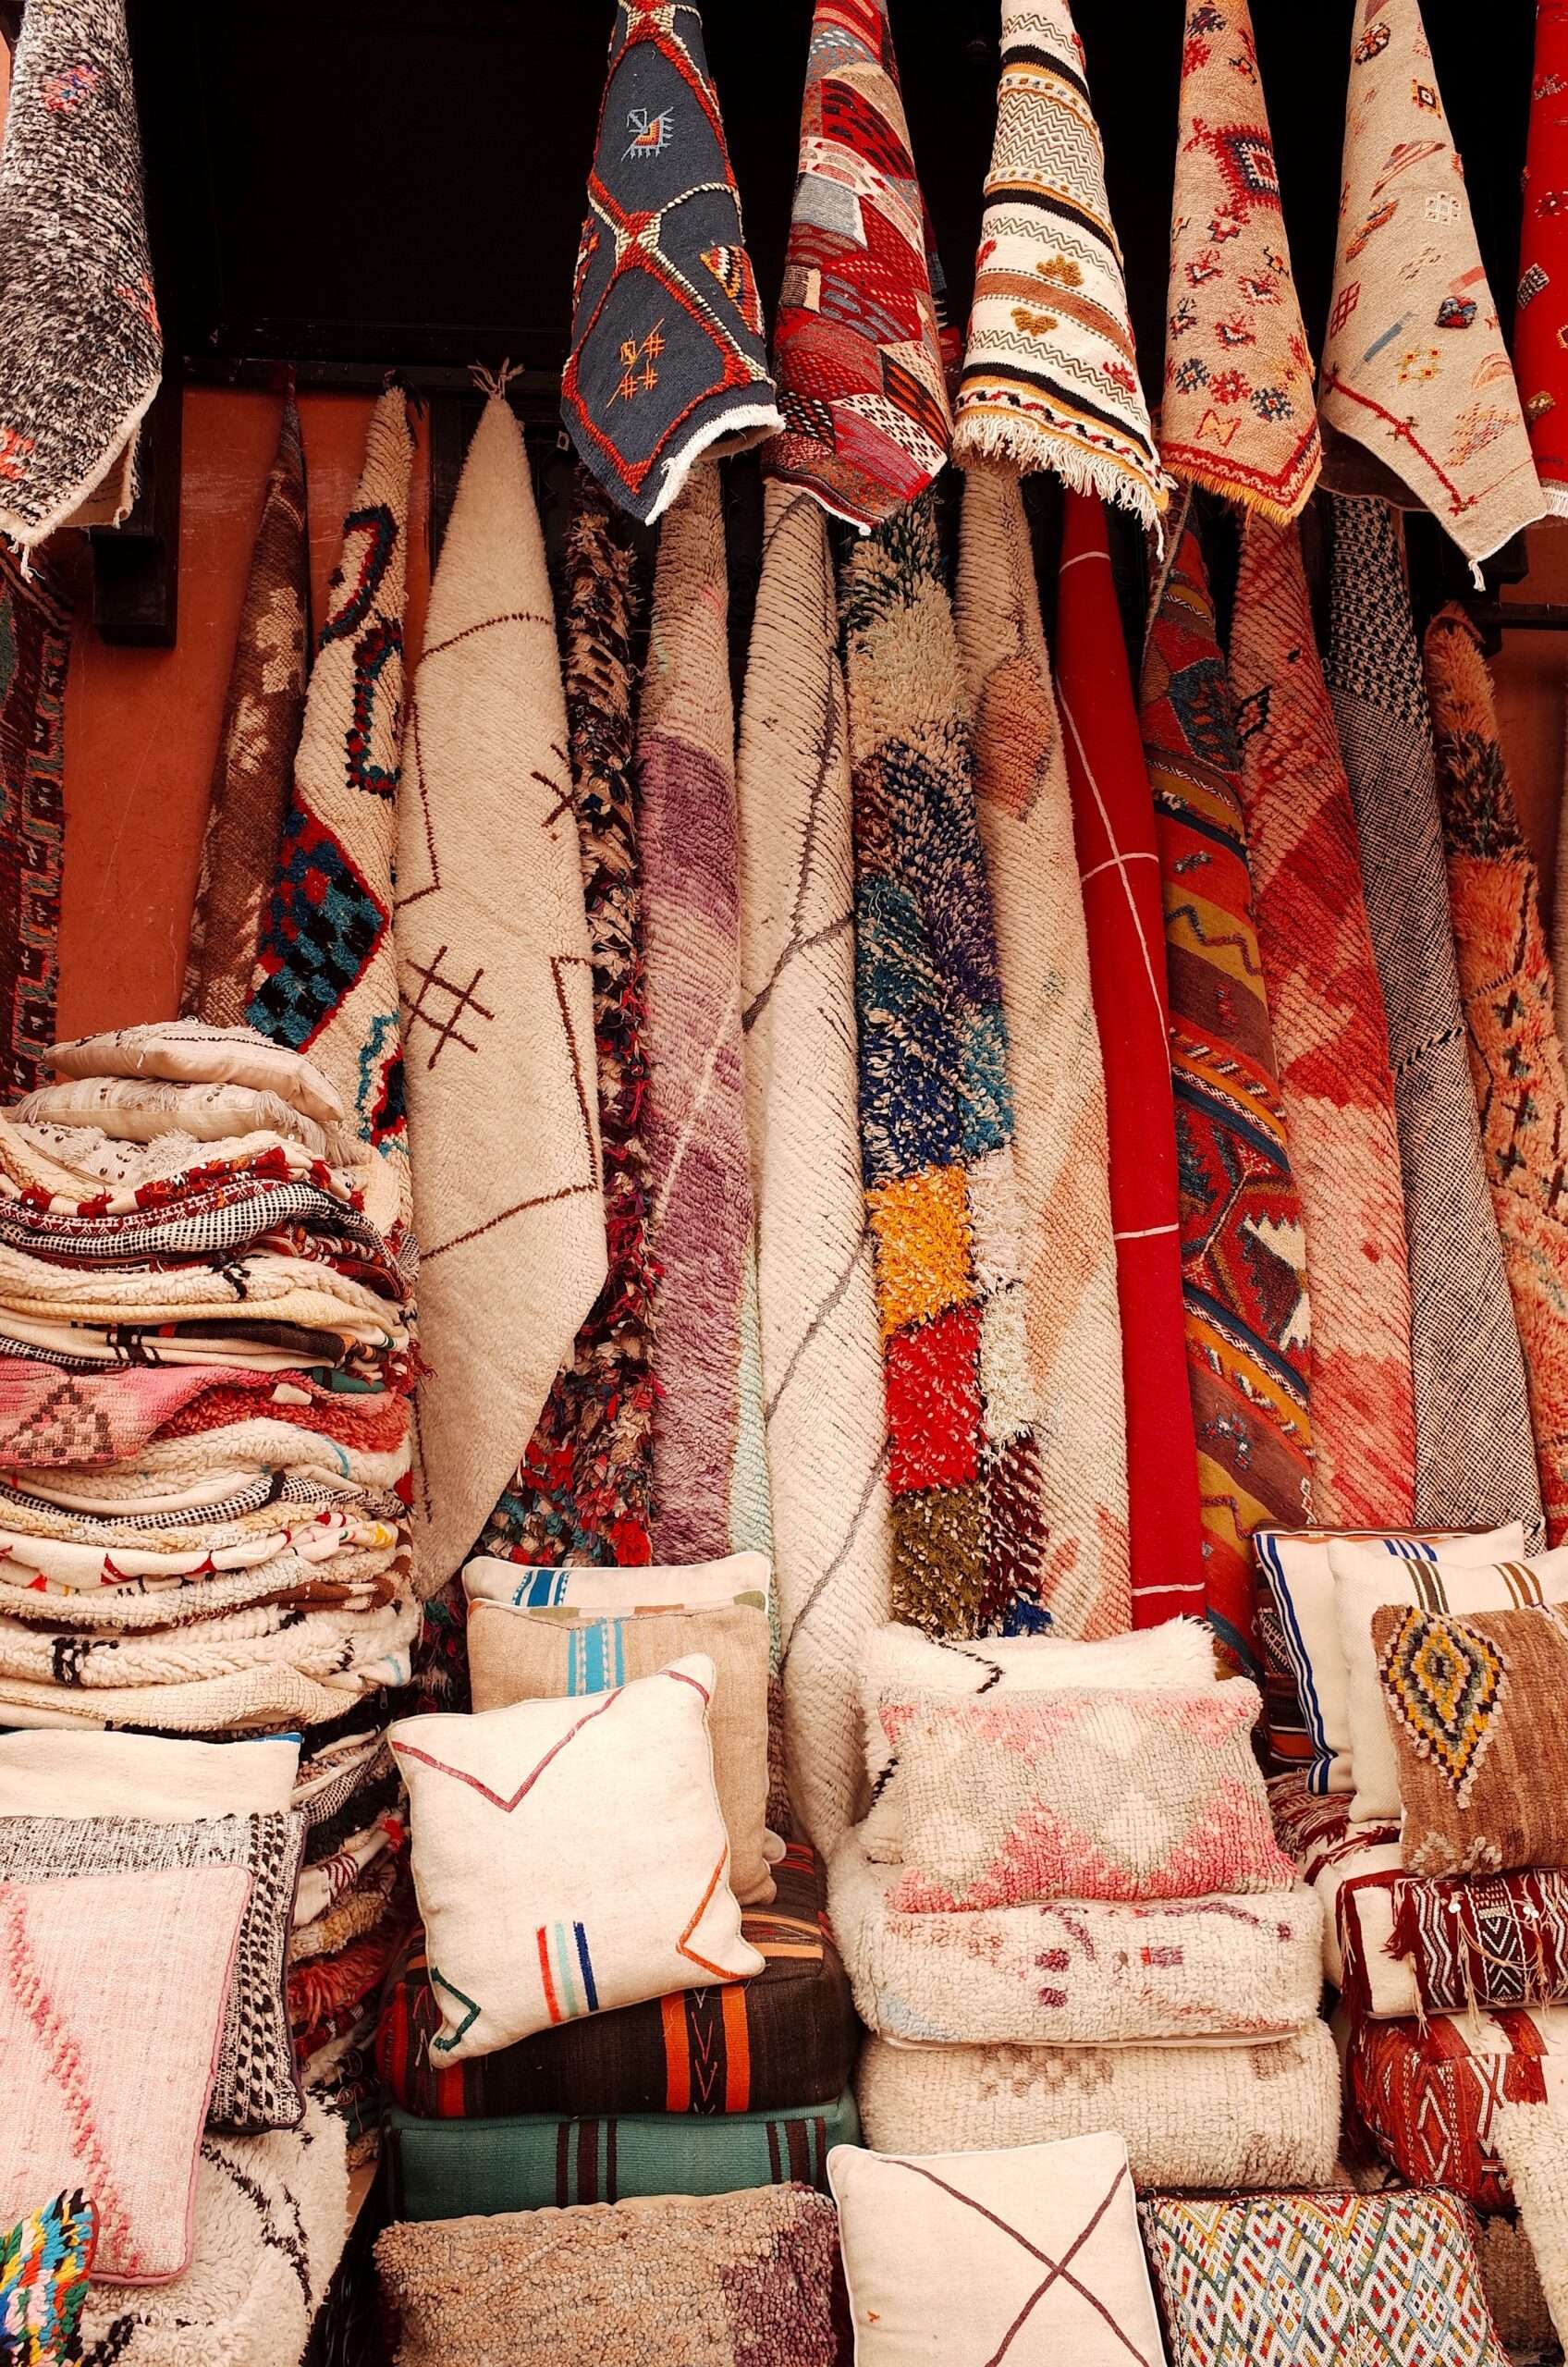 Handmade Moroccan Rugs hanged on the wall together with handmade Moroccan Pillows